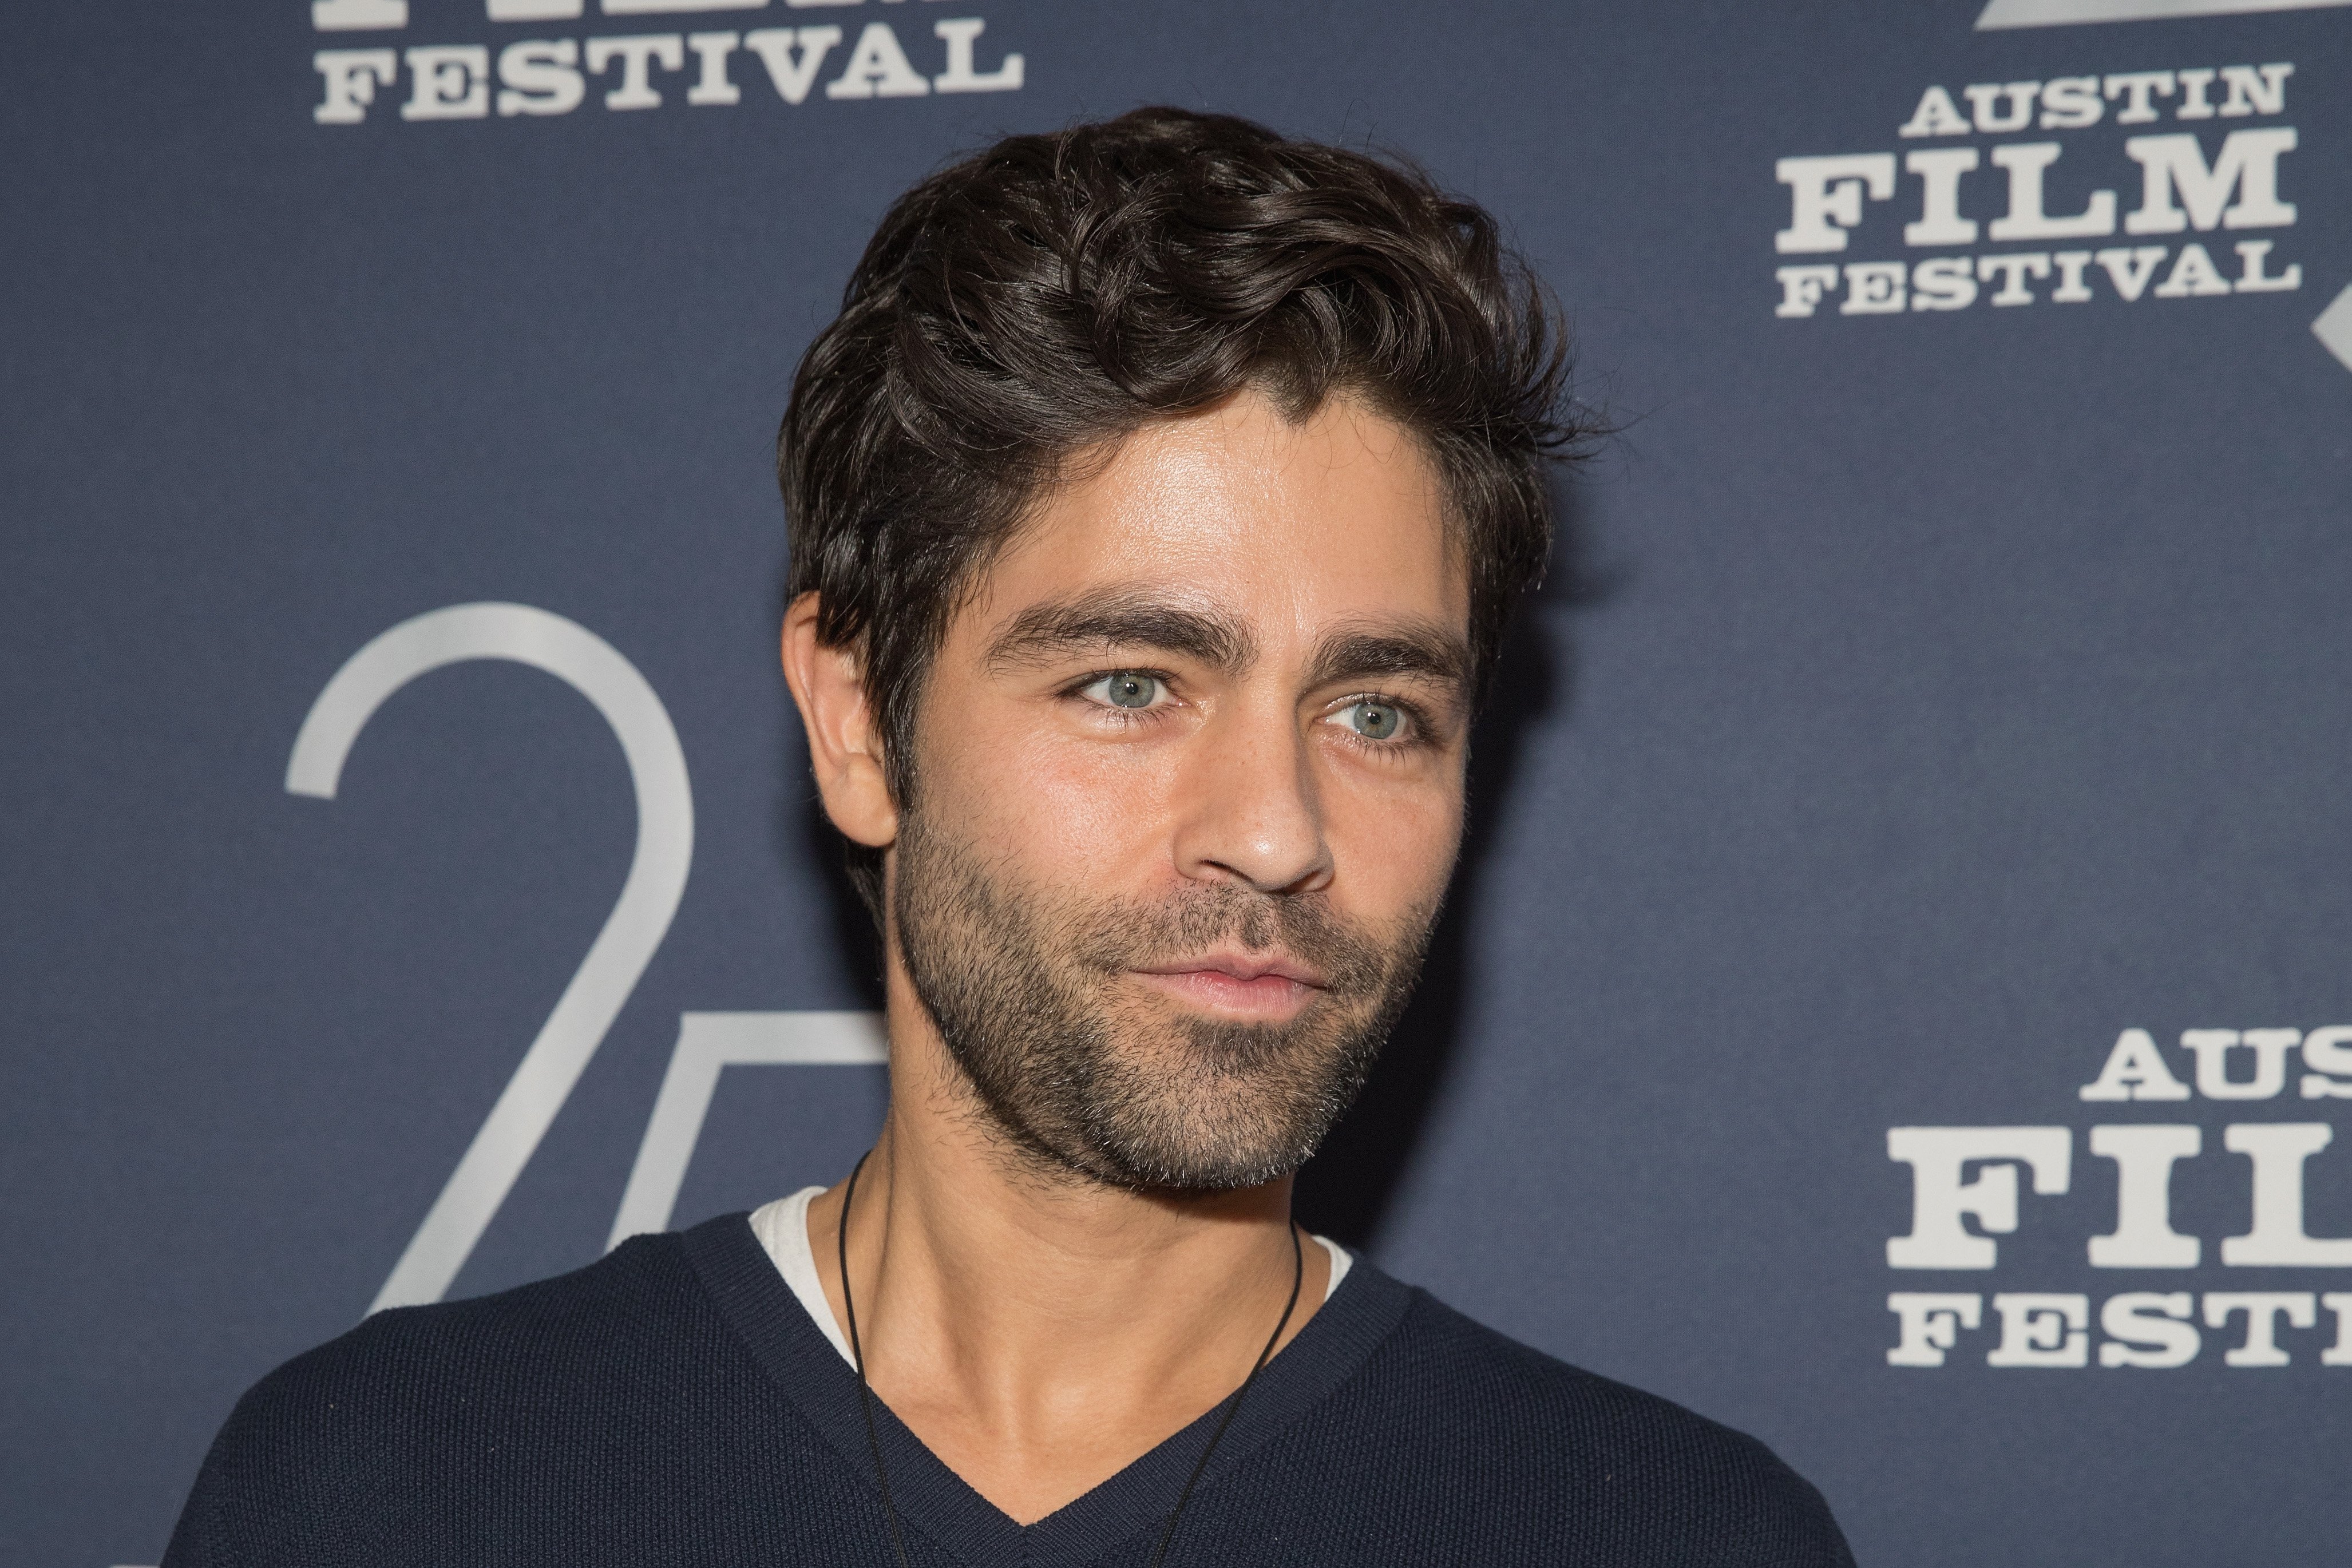 Adrian Grenier on October 25, 2018, in Austin, Texas. | Source: Getty Images 